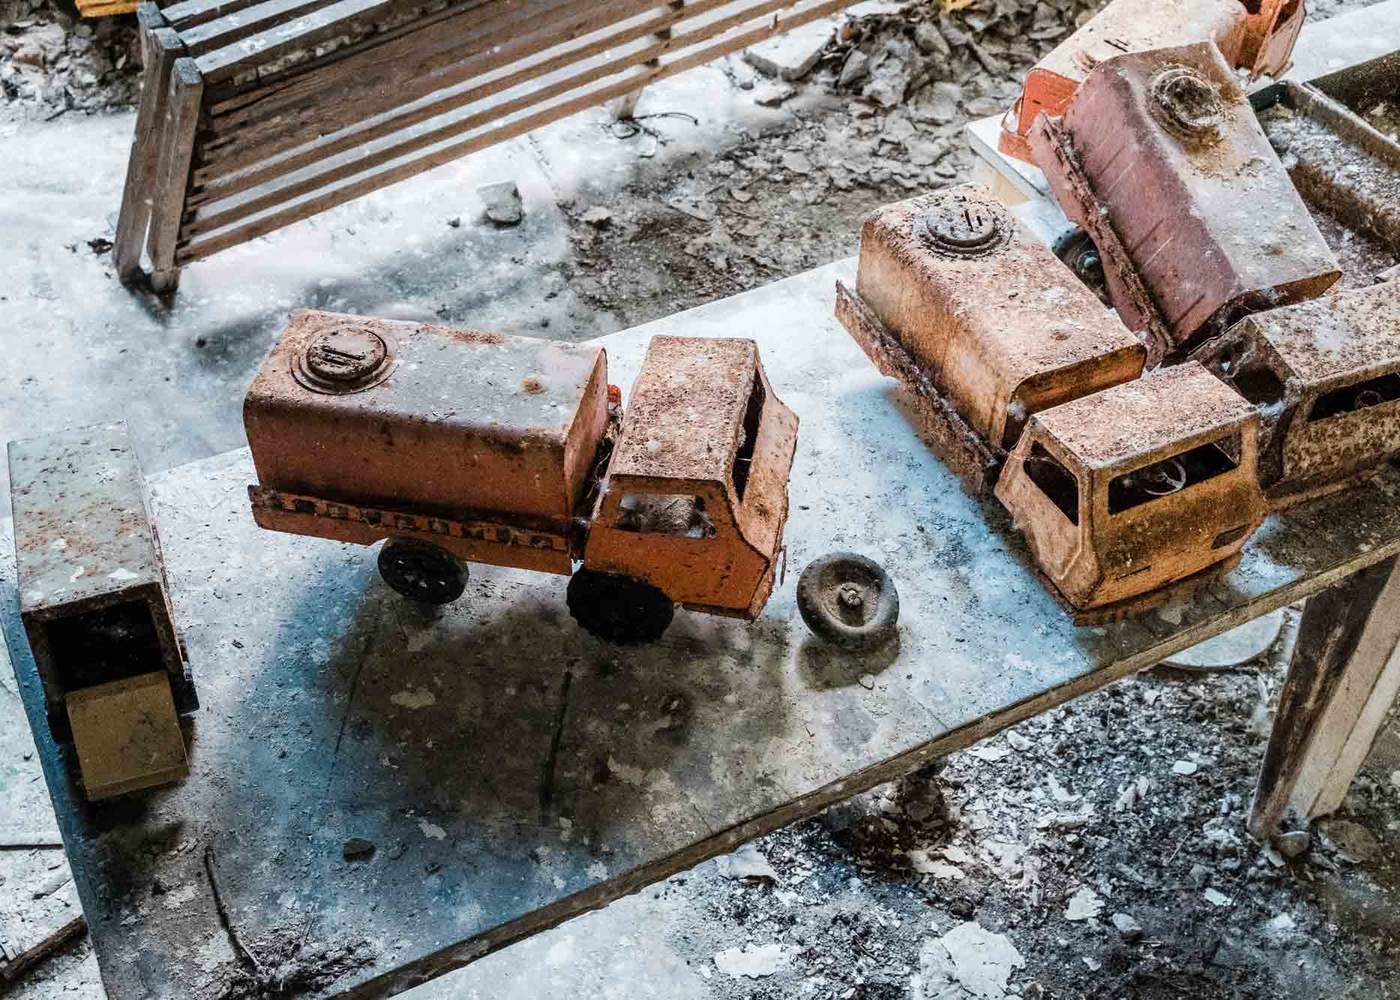 Toy trucks left behind in an abandoned nursery